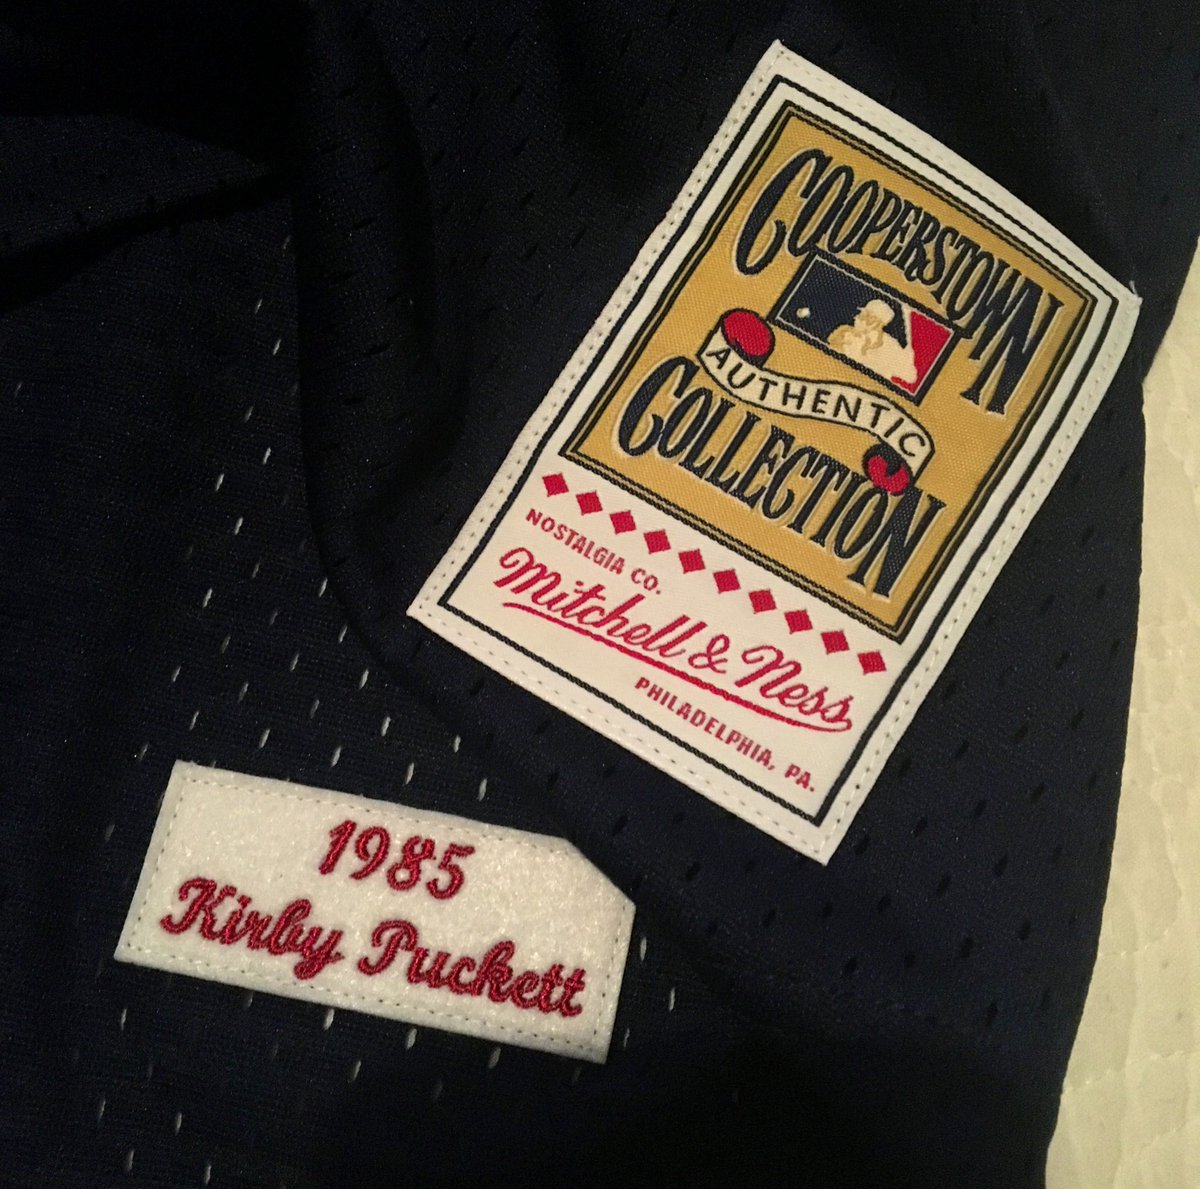 I’m so ready to wear this! 
👍🏻😎💙⚾️❤️
#MNTwins @Twins #KirbyPuckett #CooperstownCollection #Baseball #MLB #PlayBall #KP34 #WinTwins #GoTwins #MinnesotaTwins #TC @MNFlagshipStore